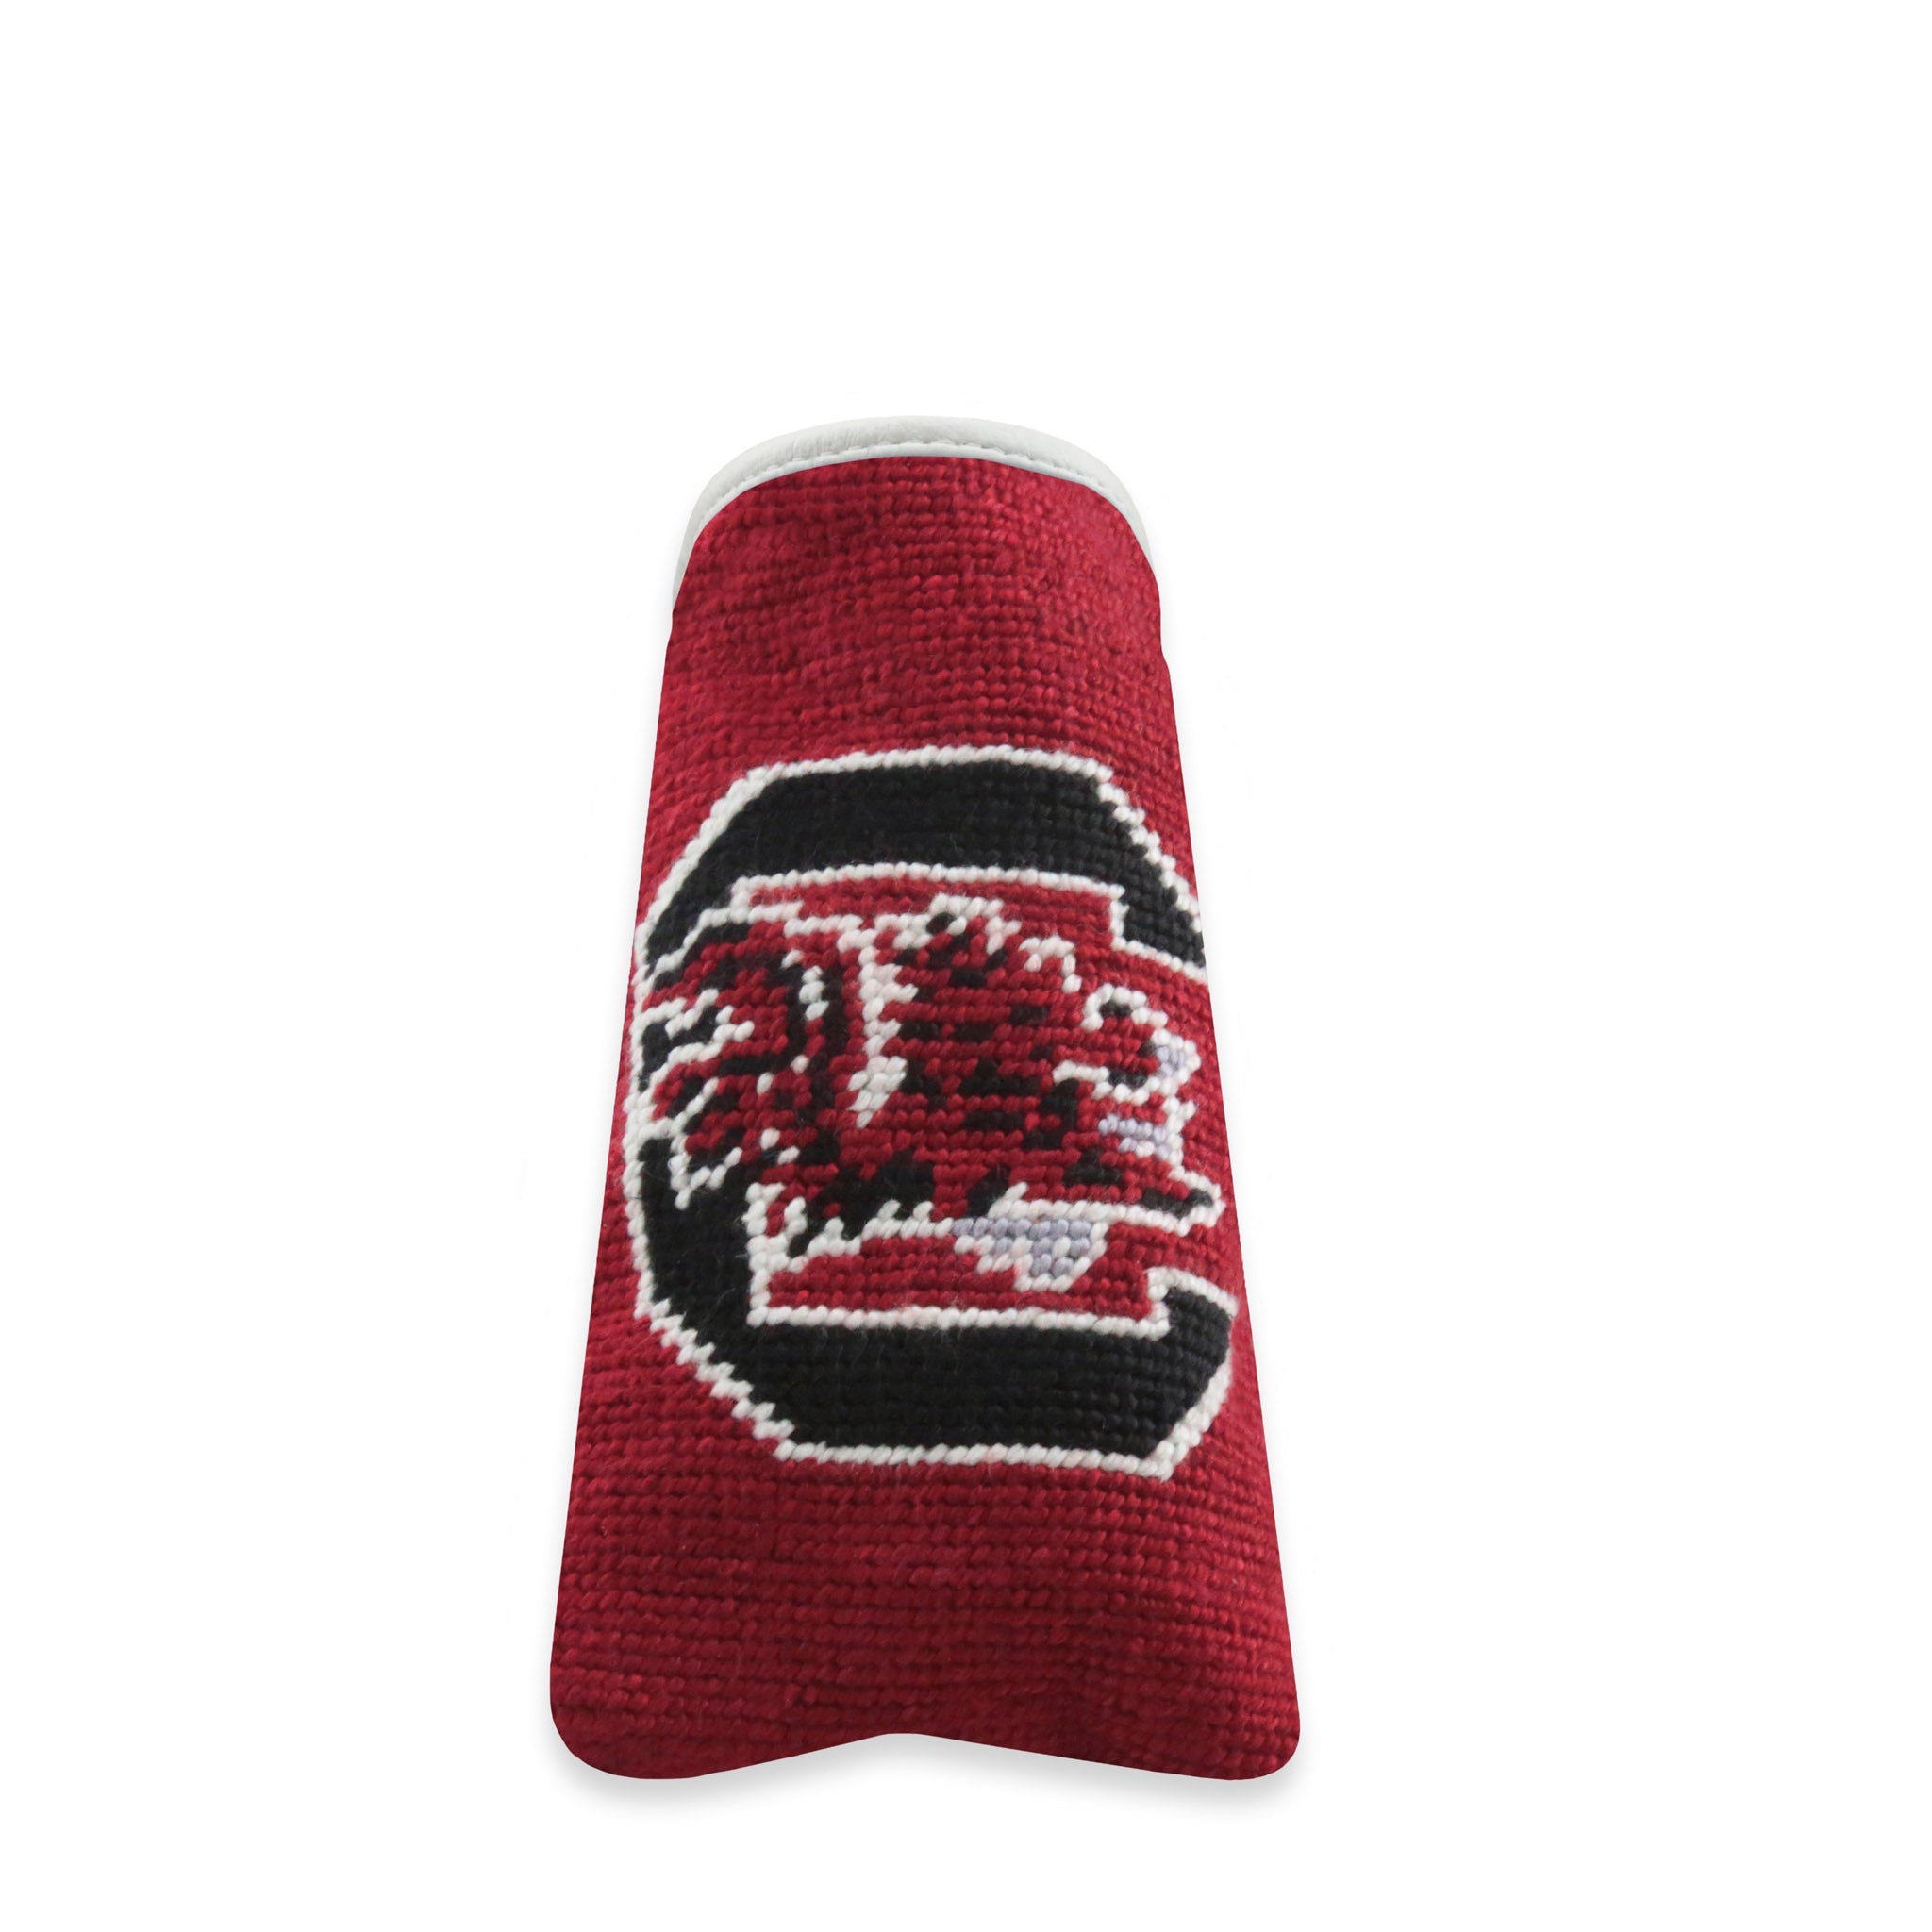 Smathers and Branson South Carolina Needlepoint Putter Headcover 